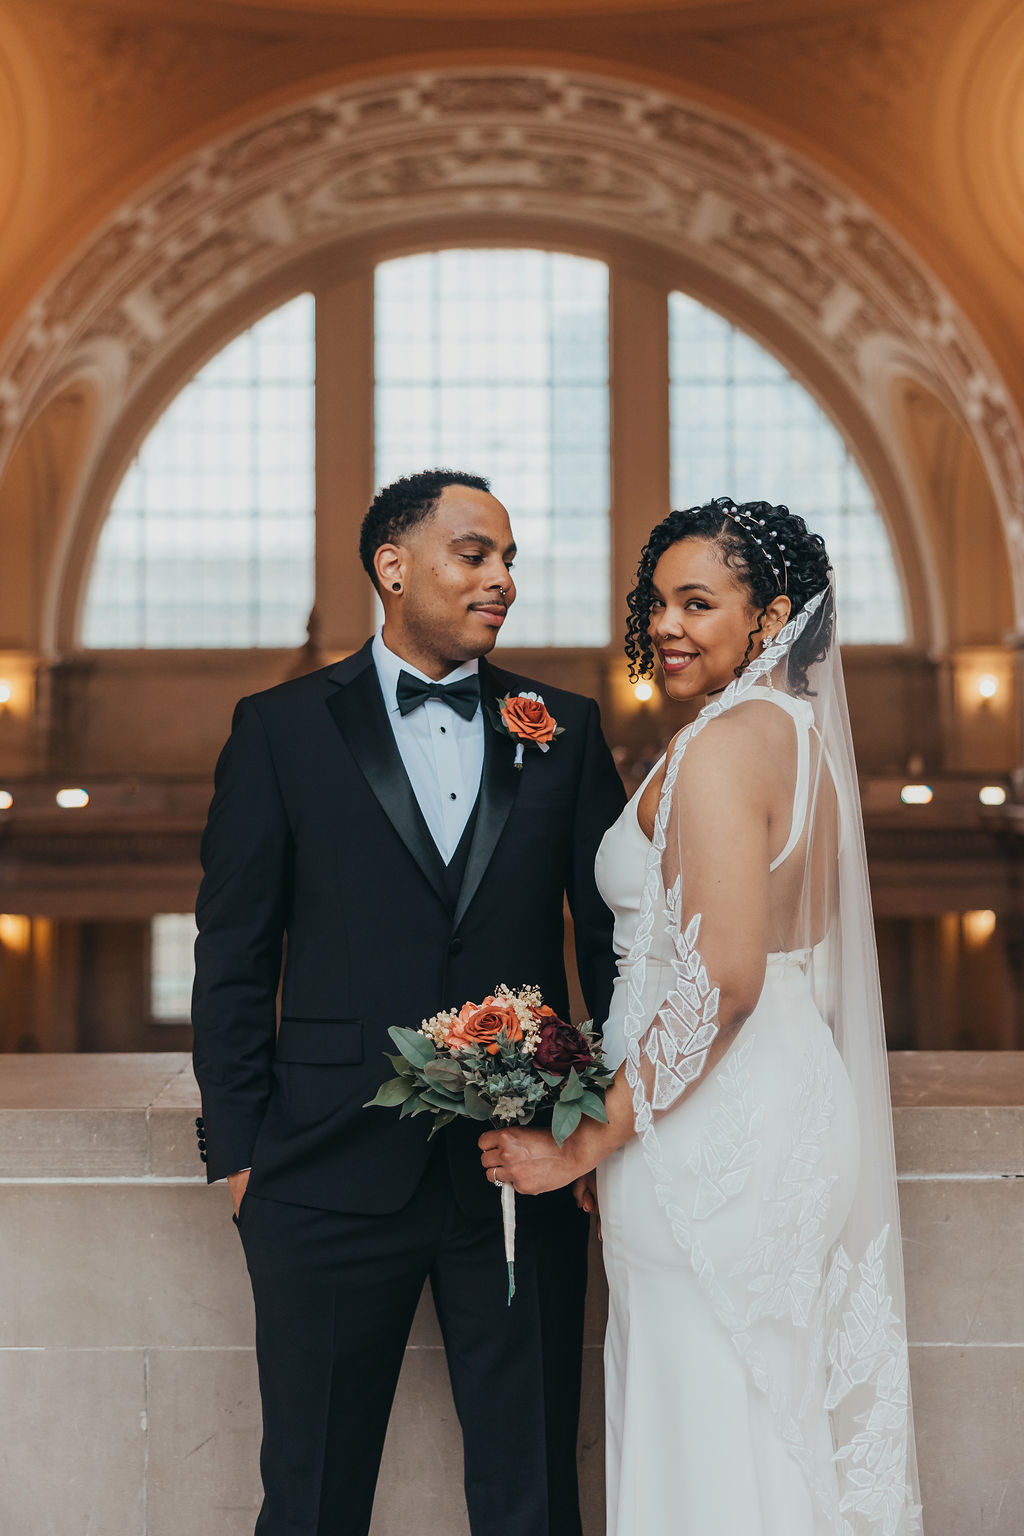 A bride and groom smiling at each other in a grand hall, the bride in a white dress and veil, the groom in a black tuxedo with a boutonniere at their wedding